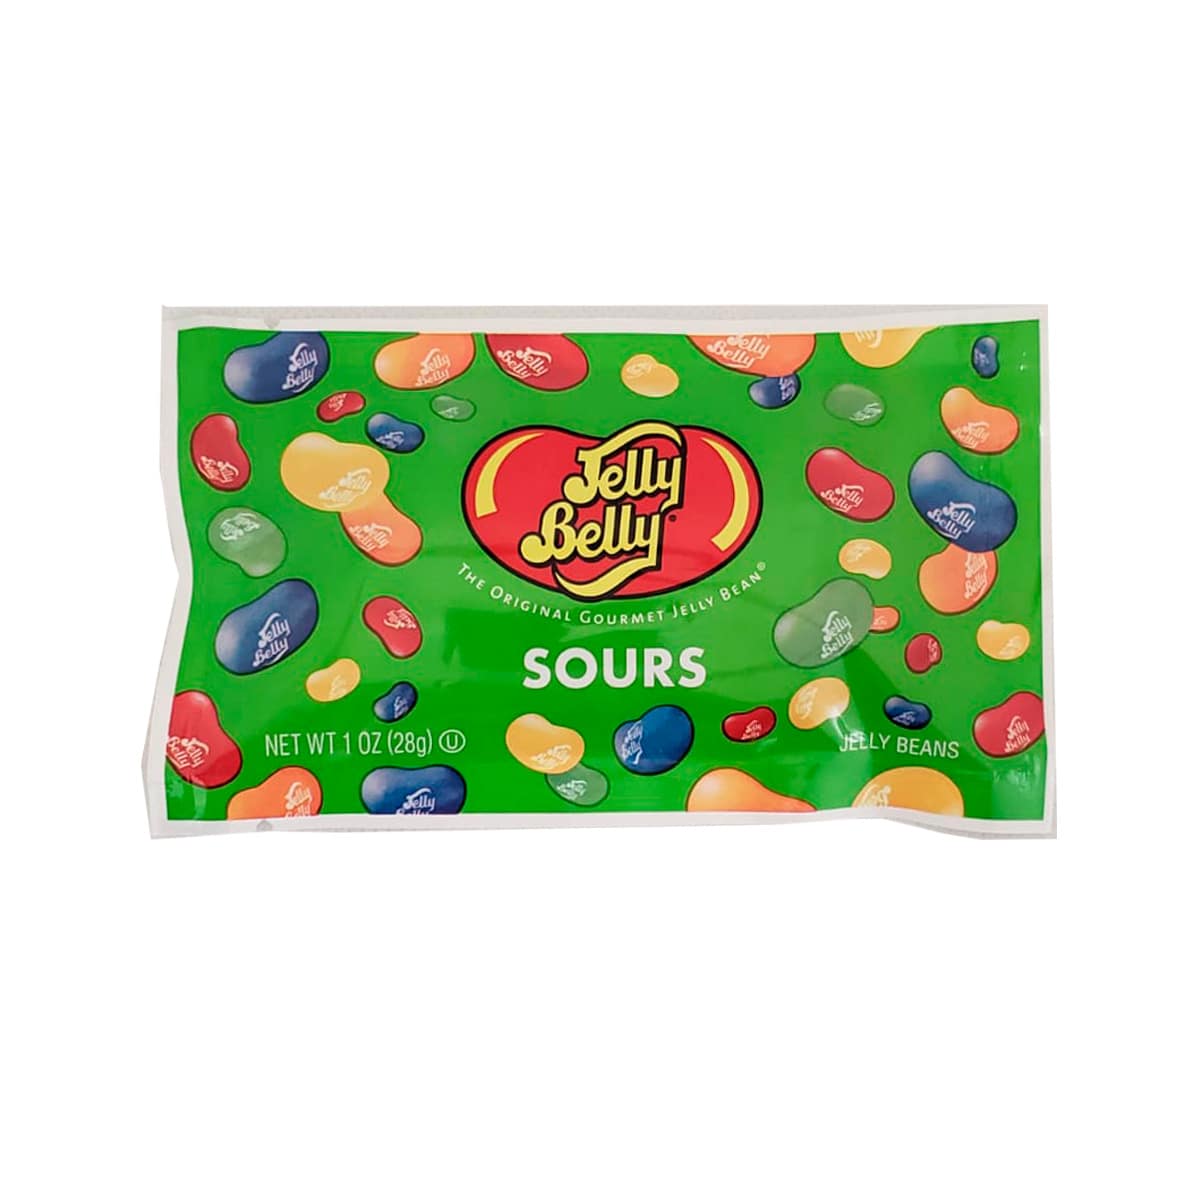 1 OZ BAGS JELLY BELLY 5 FLAVOR SOURS